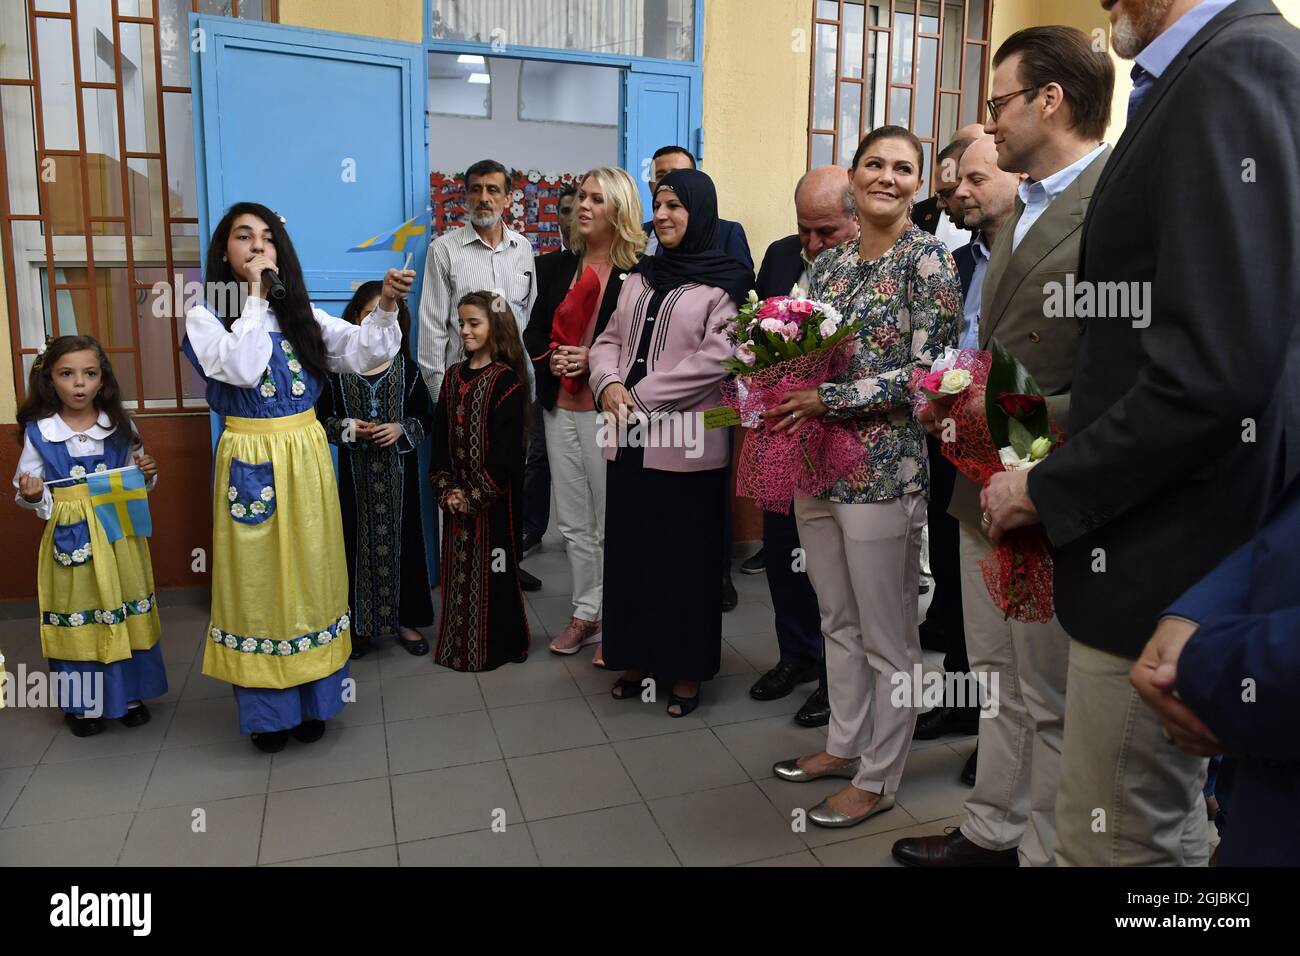 BEIRUT 20181018 Swedish Crown Princess Victoria, Prince Daniel and Minister Lena Hallengren during a visit to a girl school in Beirut, Lebanon on Thursday The students performed the national anthem of Sweden. The Crown Princess couple is on a five-day visit to Jordan and Libanon. Photo: Jonas Ekstromer / TT / code 10030  Stock Photo